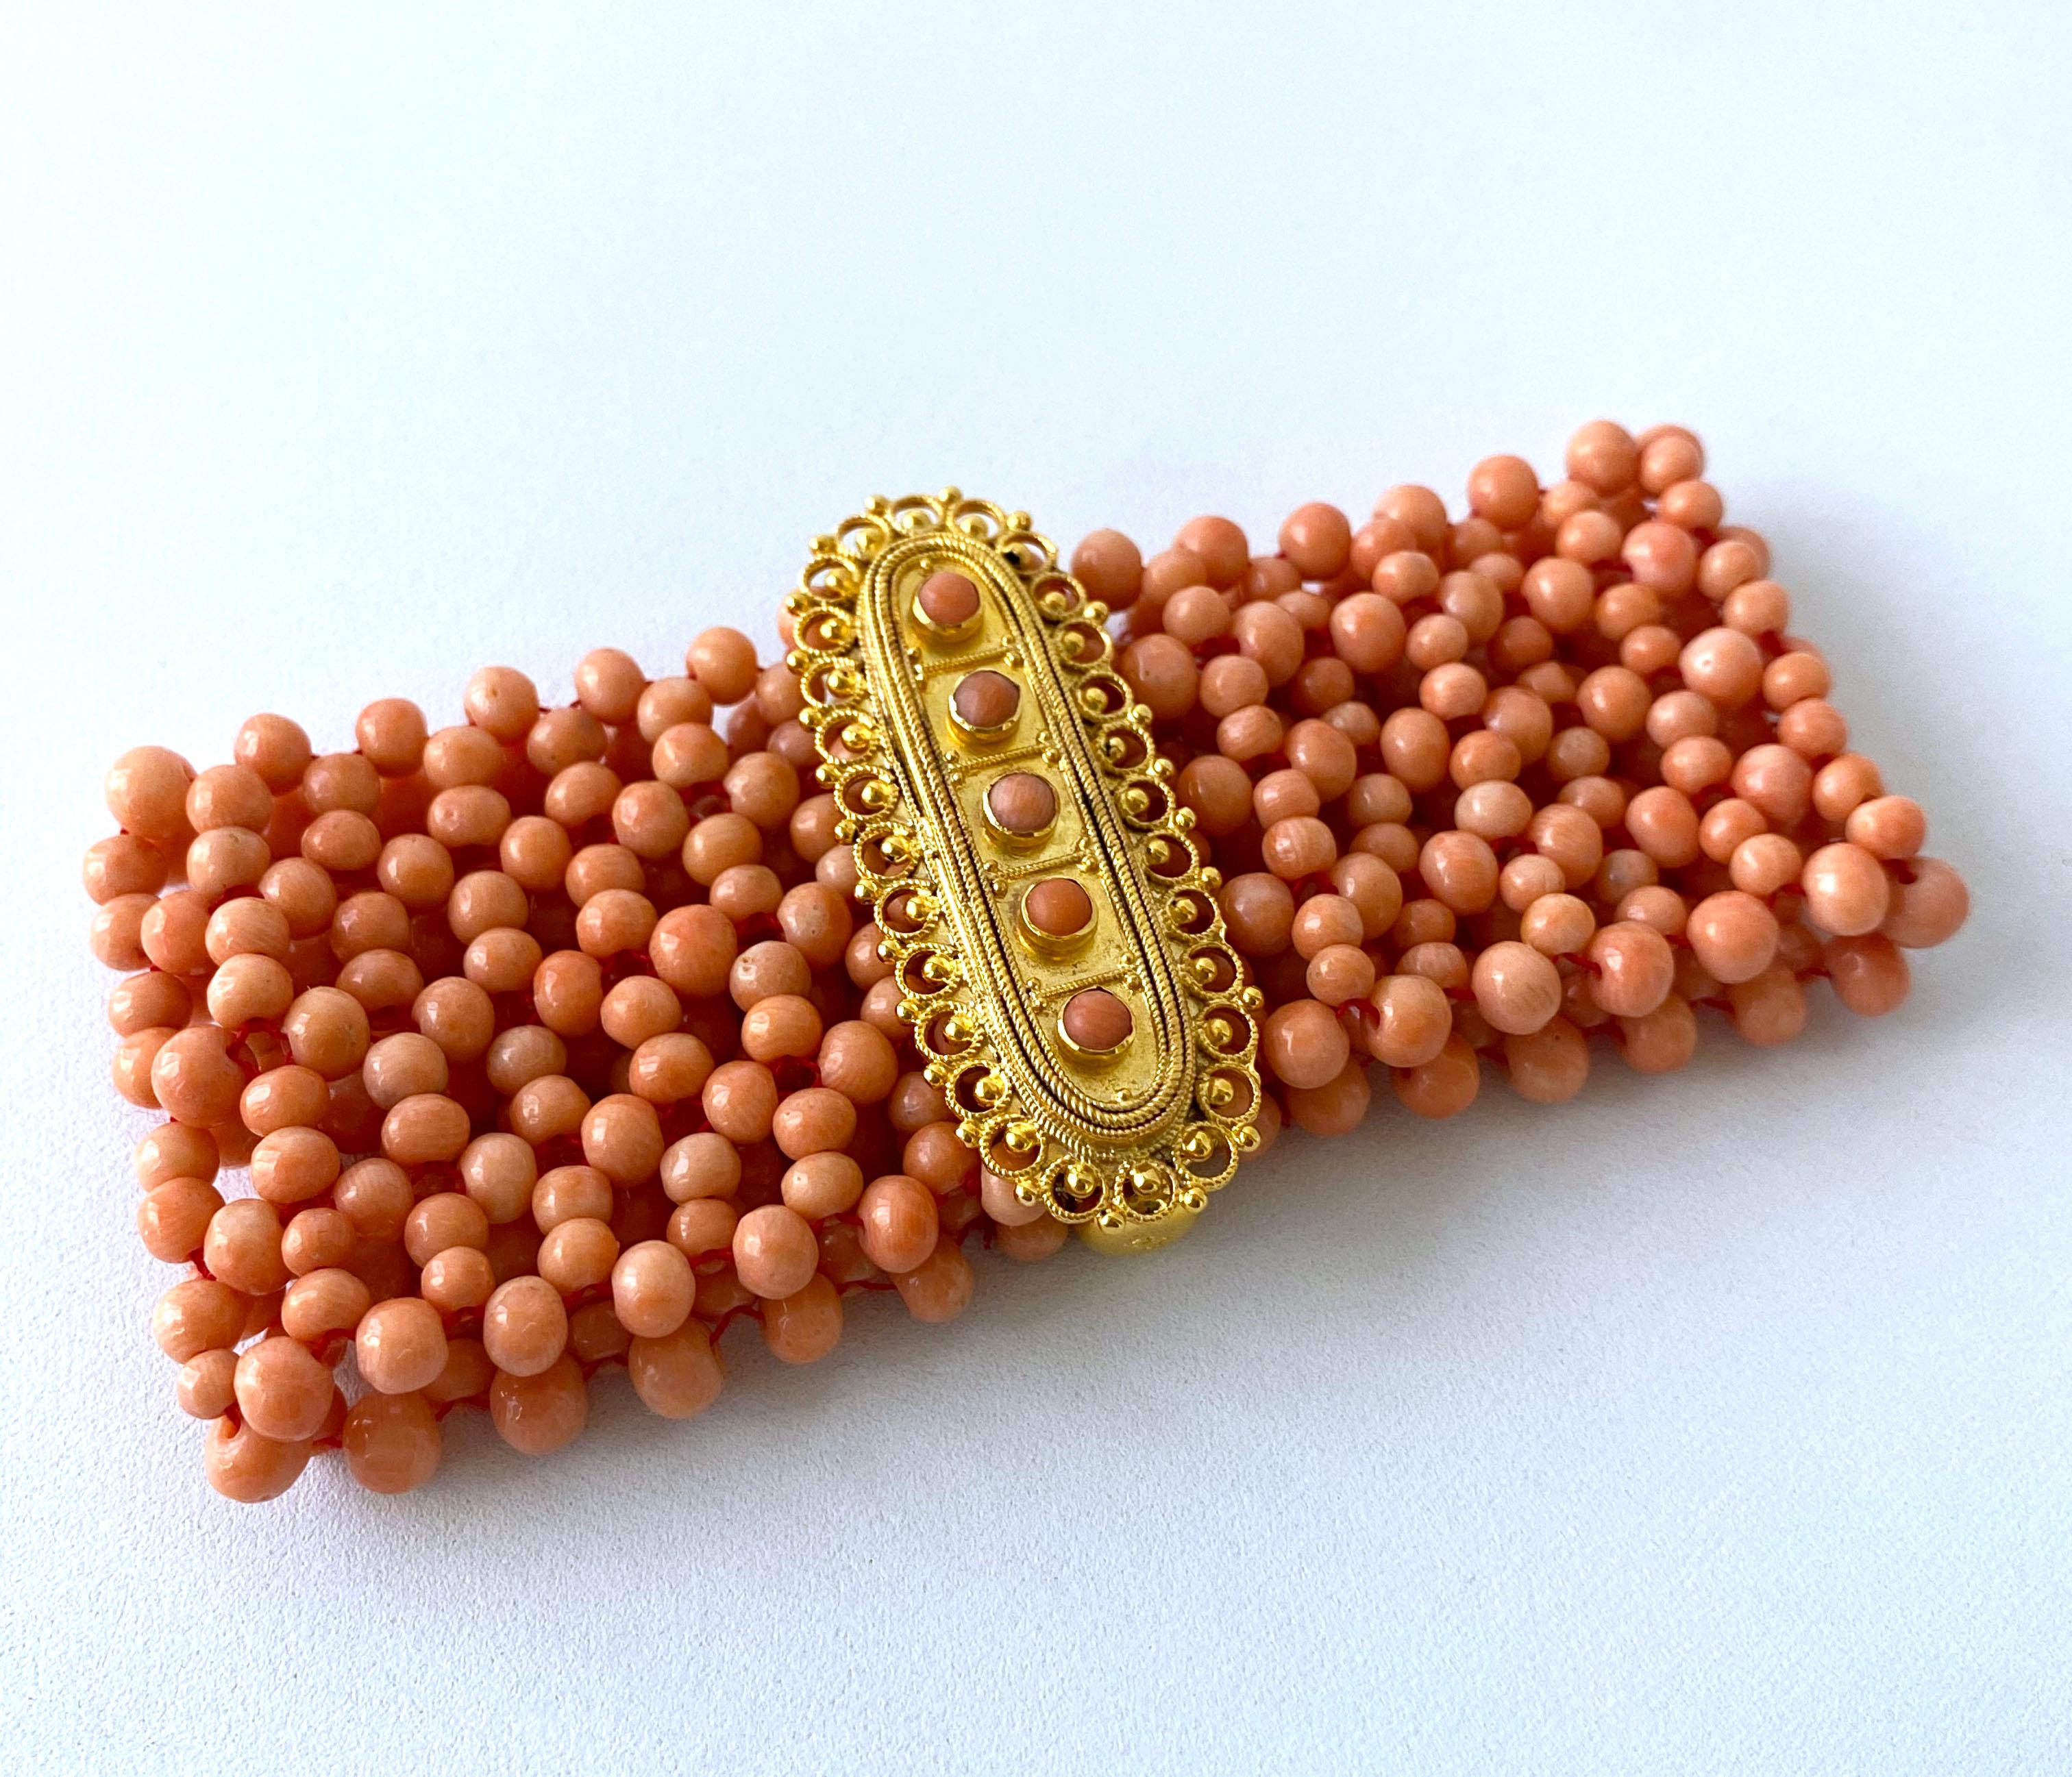 Artisan Marina J. Coral Woven Bracelet with 18k Yellow Gold Plated Centerpiece & Clasp